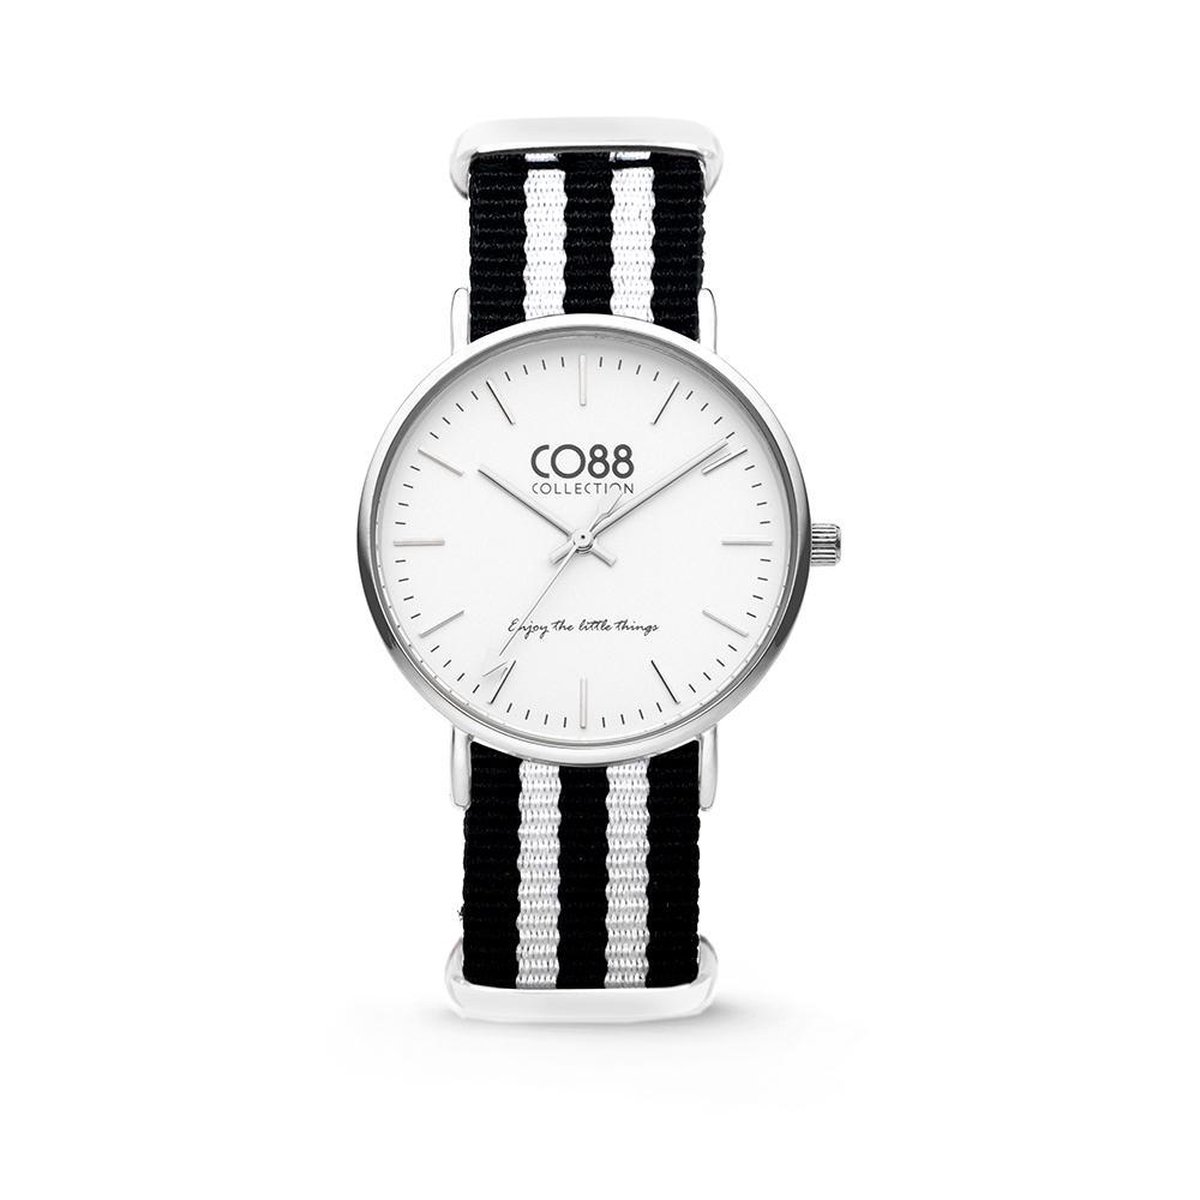 CO88 Collection Watches 8CW 10035 Horloge - Nato Band - Ø 36 mm - Zwart - Wit